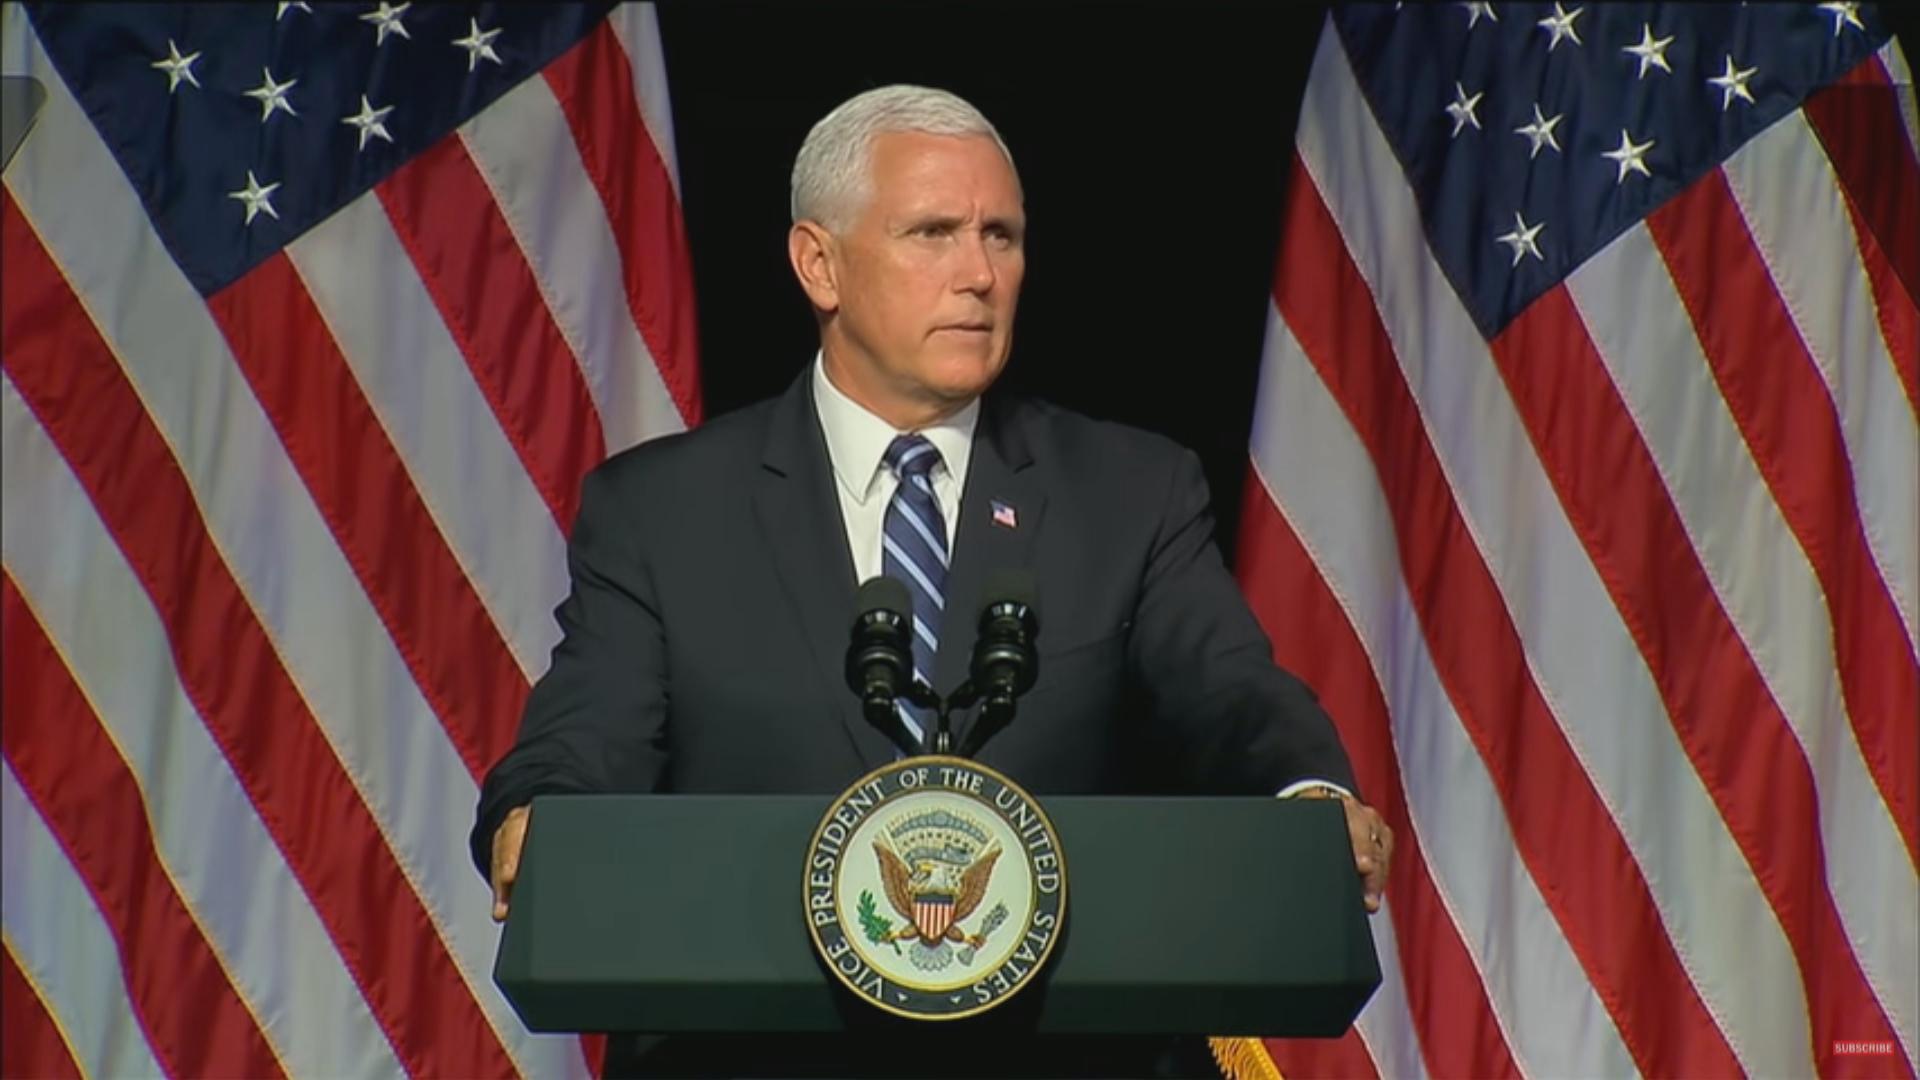 Vice President Mike Pence: “The space environment is fundamentally changed in the last generation.”